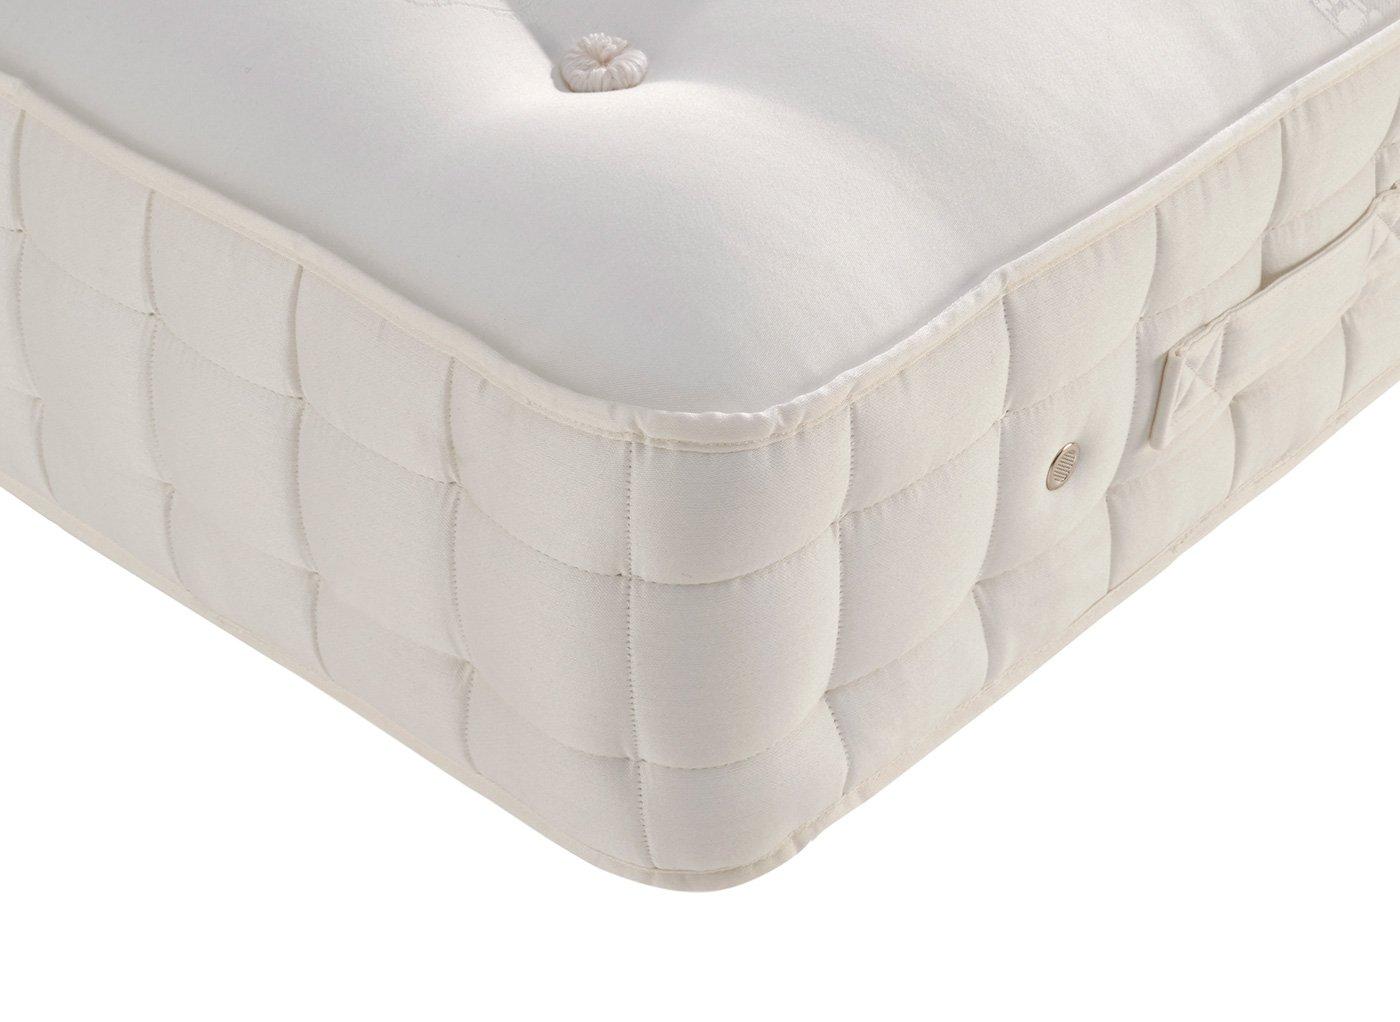 11 inch Deep Memory foam mattress with 1200 pocket springs FREE next day